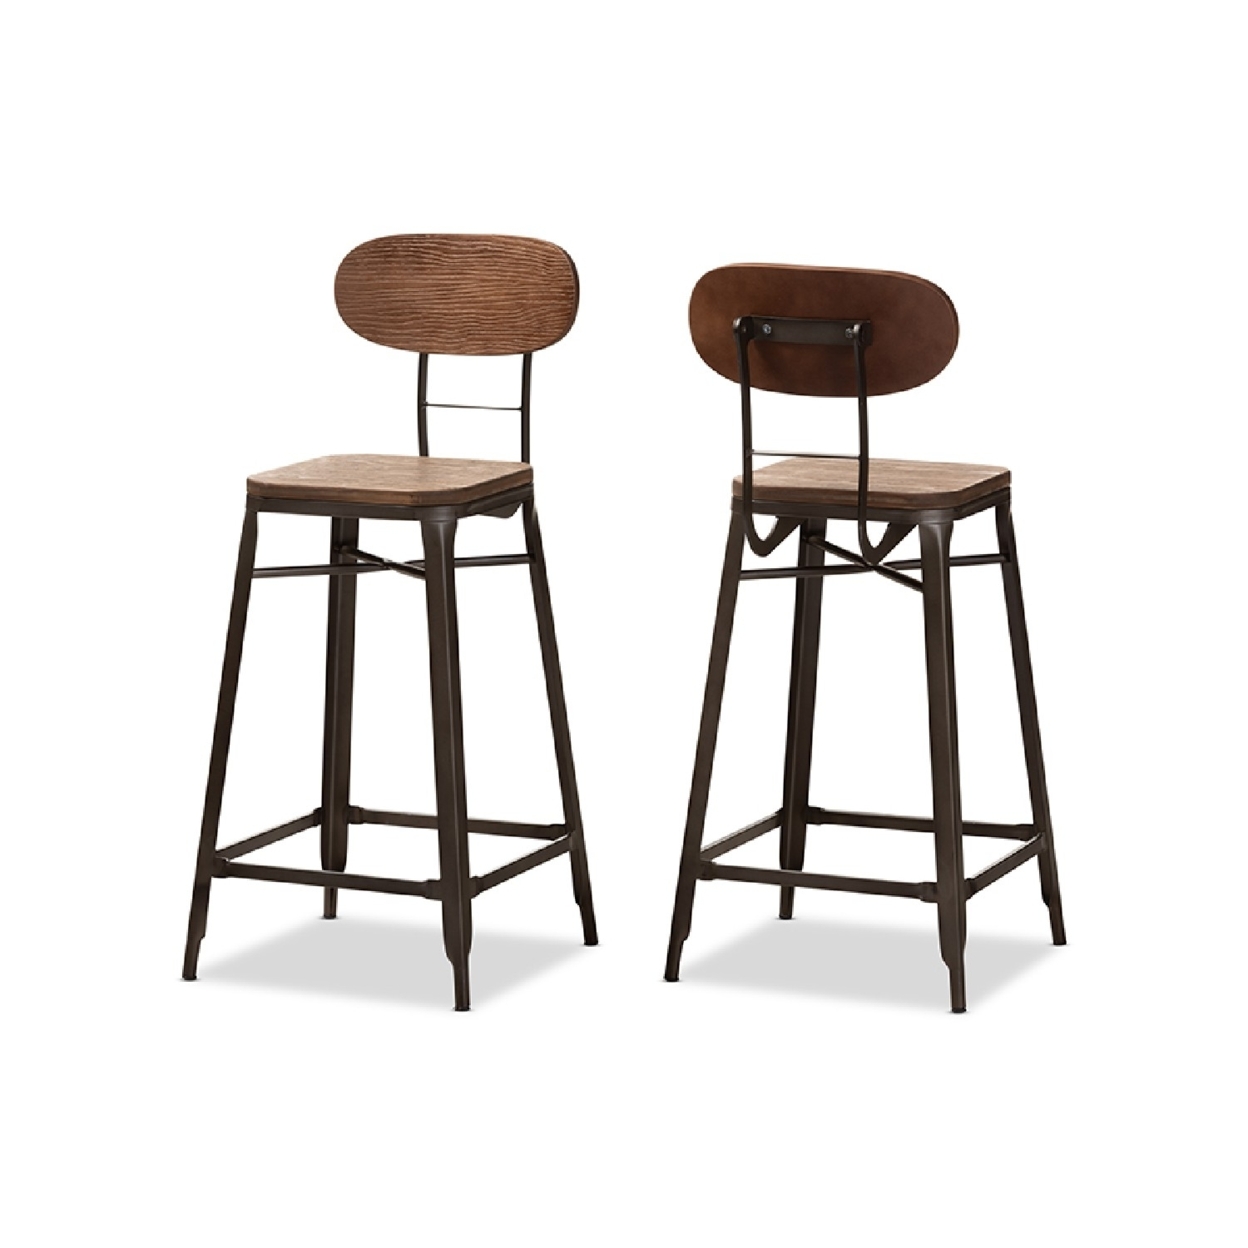 Baxton Studio Varek Vintage Rustic Industrial Style Bamboo and Rust-Finished Steel Stackable Bar Stool Set